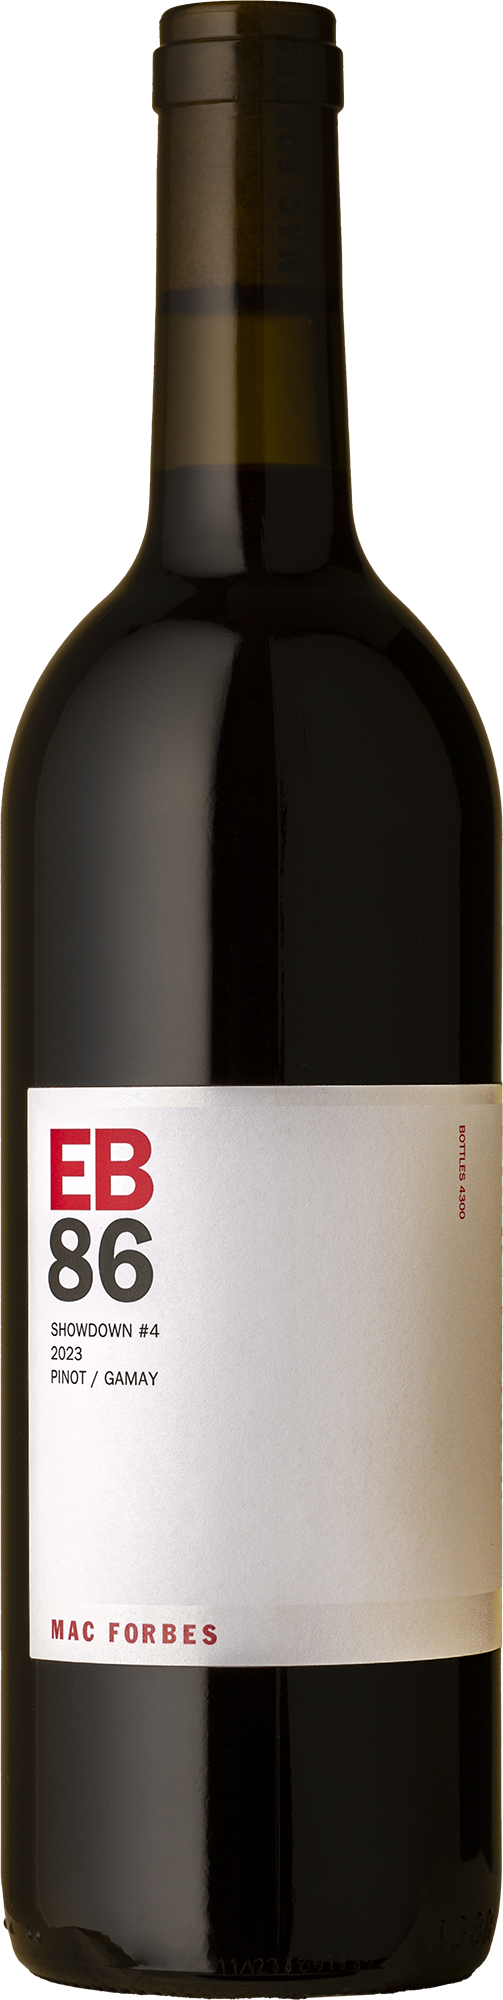 Mac Forbes - EB86 Pinot / Gamay 2023 Red Wine